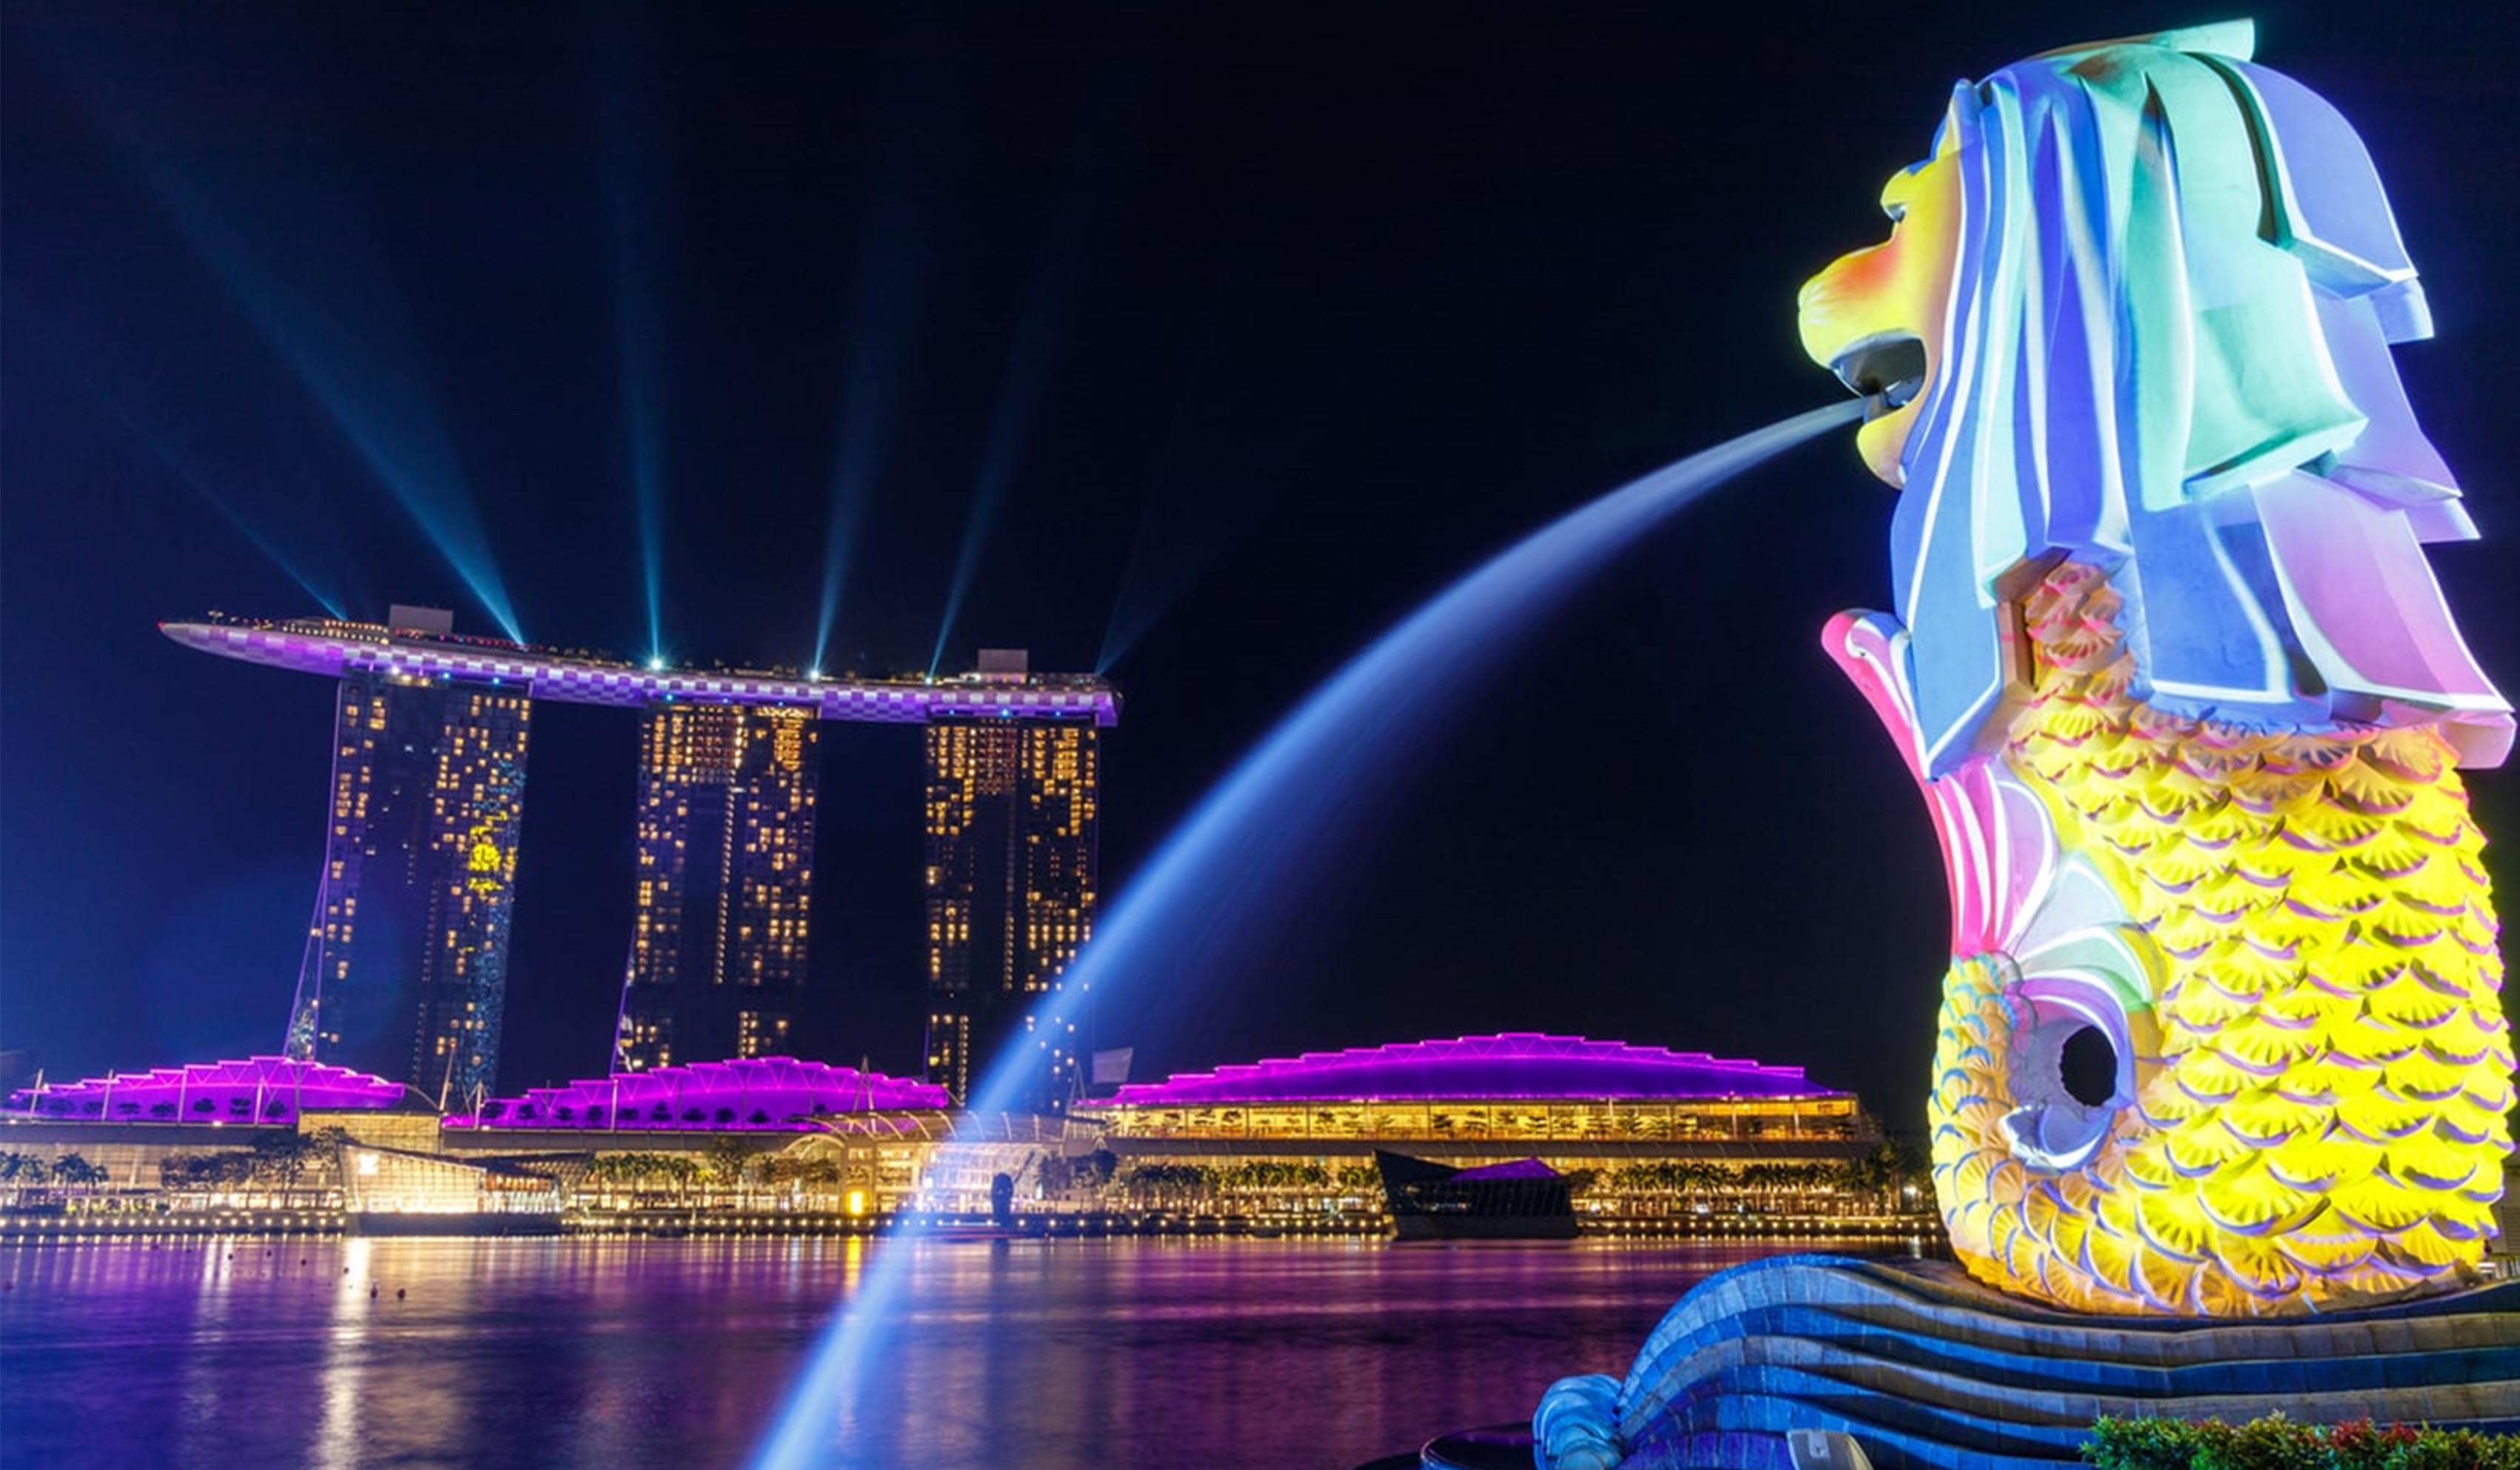 Innovation in SINGAPORE: Green Infrastructure, Architecture and Technology